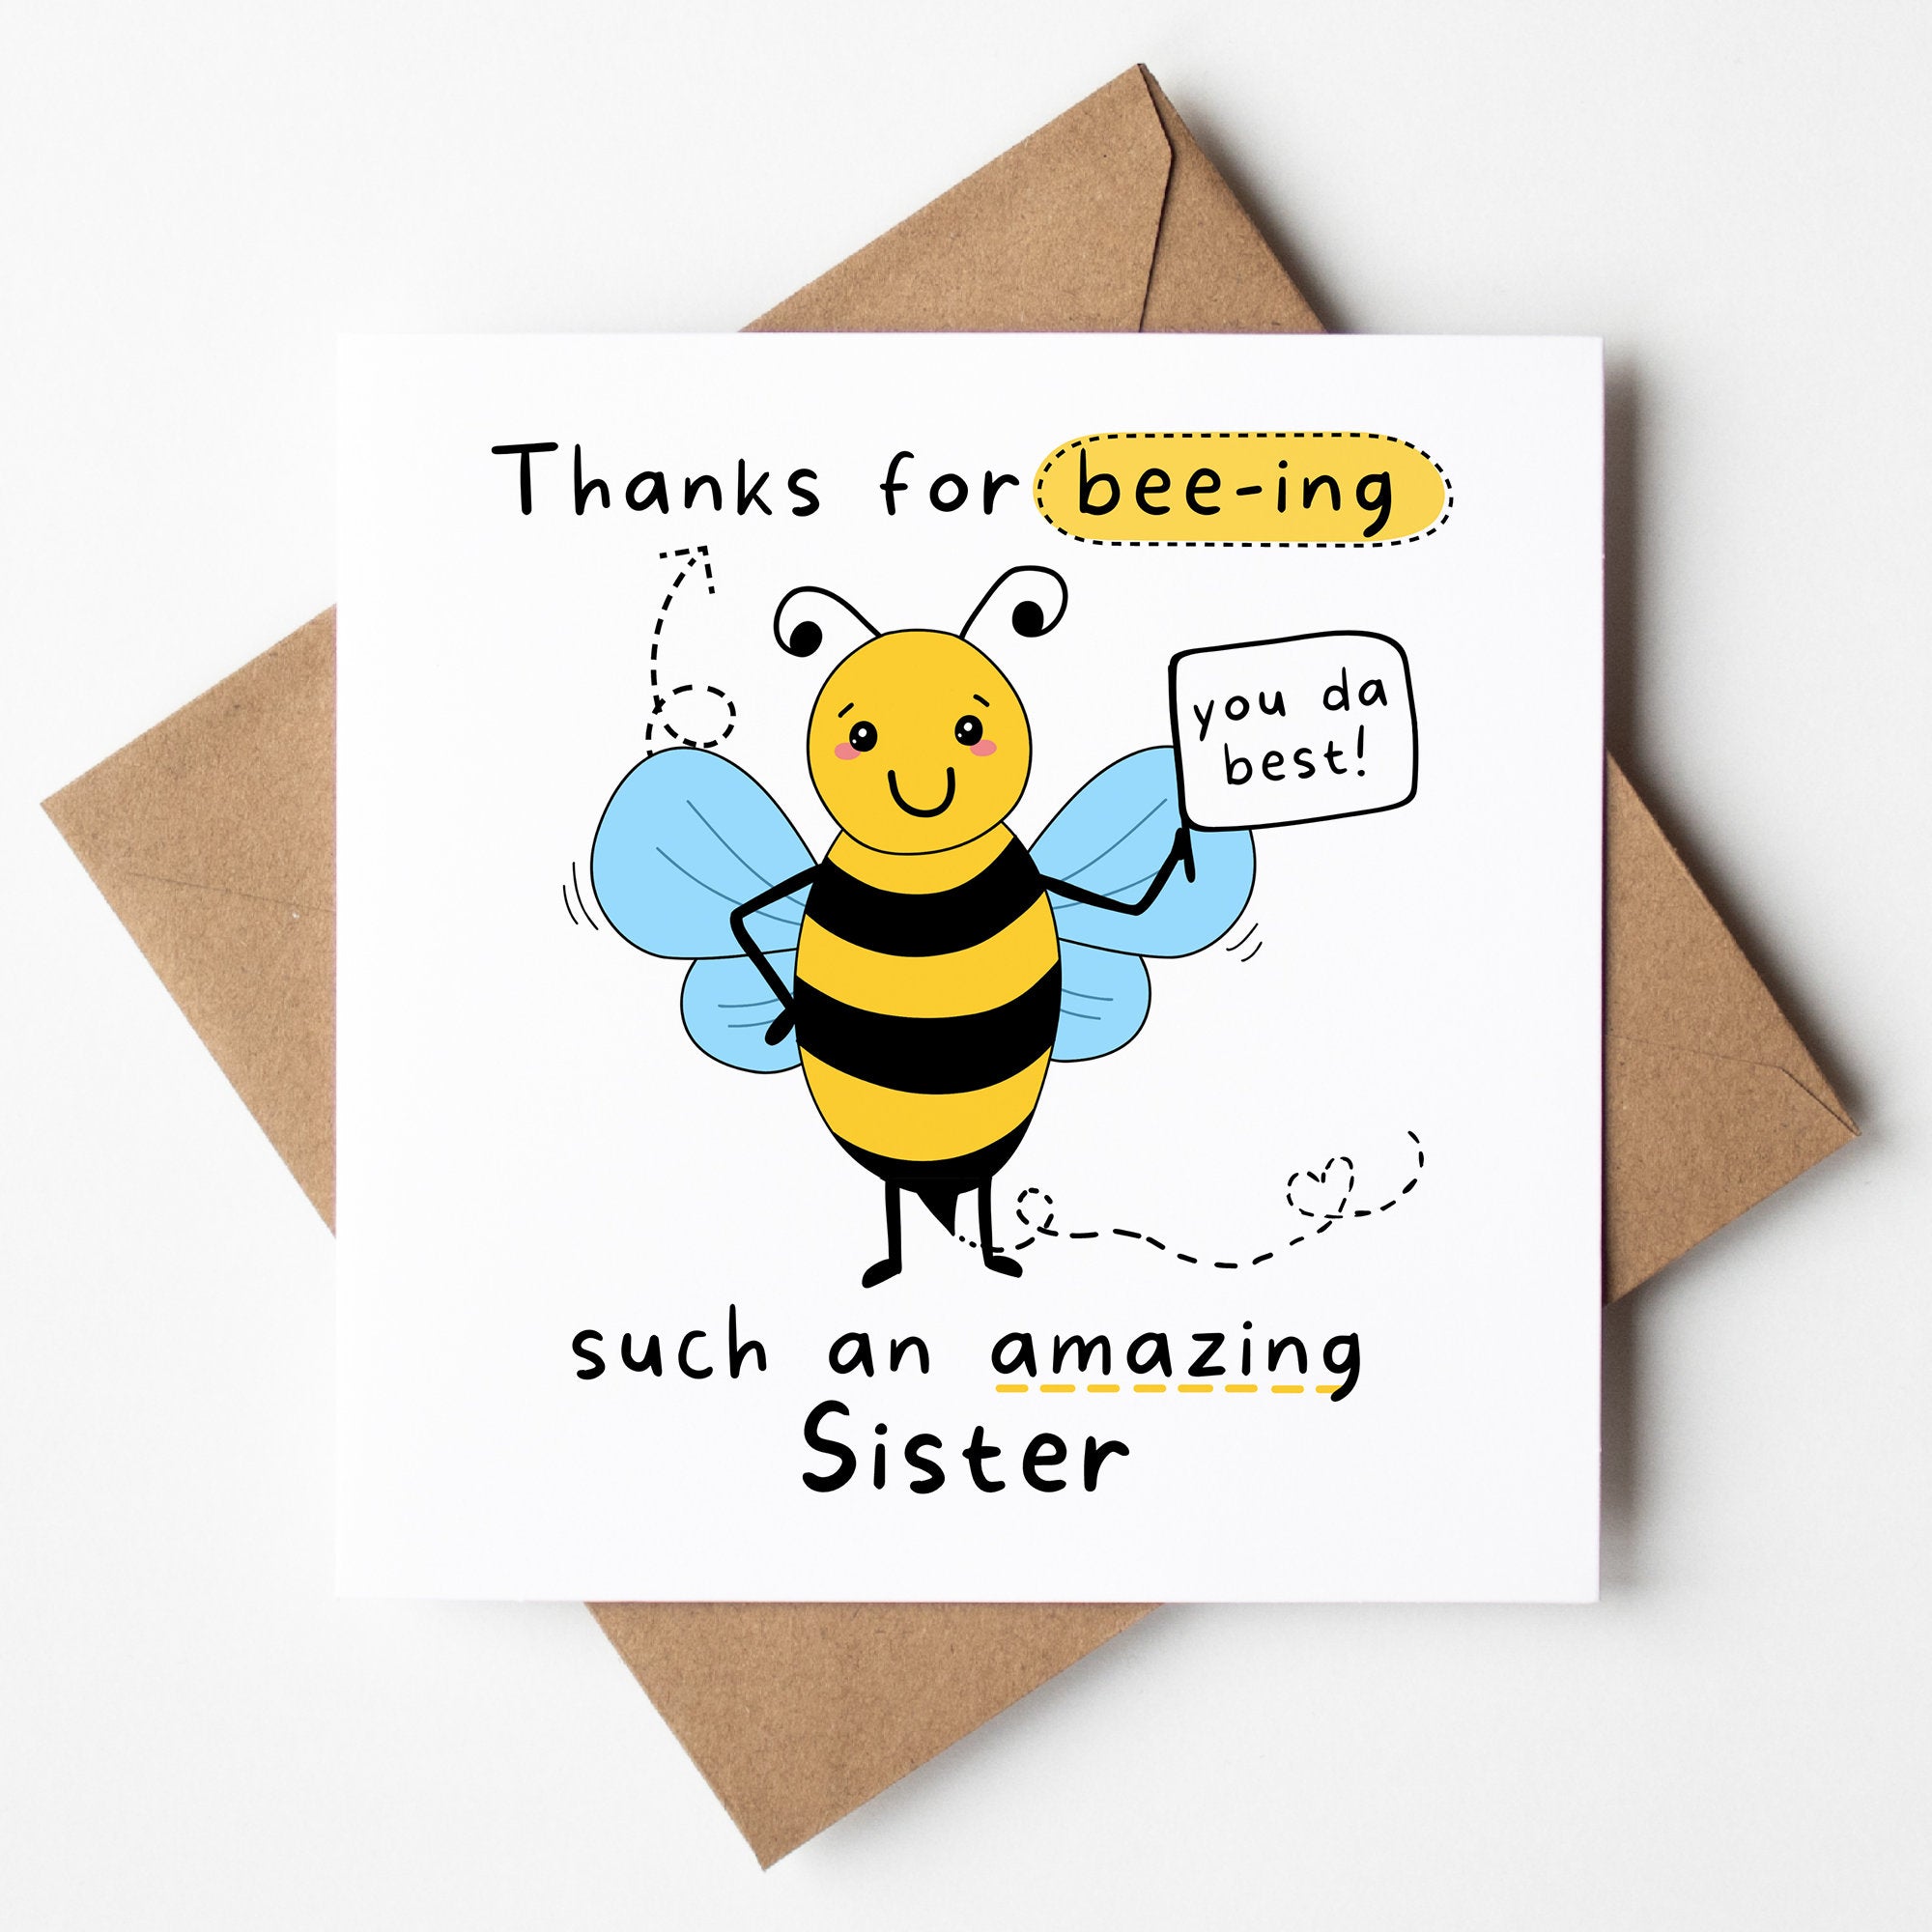 Thanks For Beeing Such An Amazing Sister, Cute Card, Bee Pun, Sister Thank You Card, Card For Sister